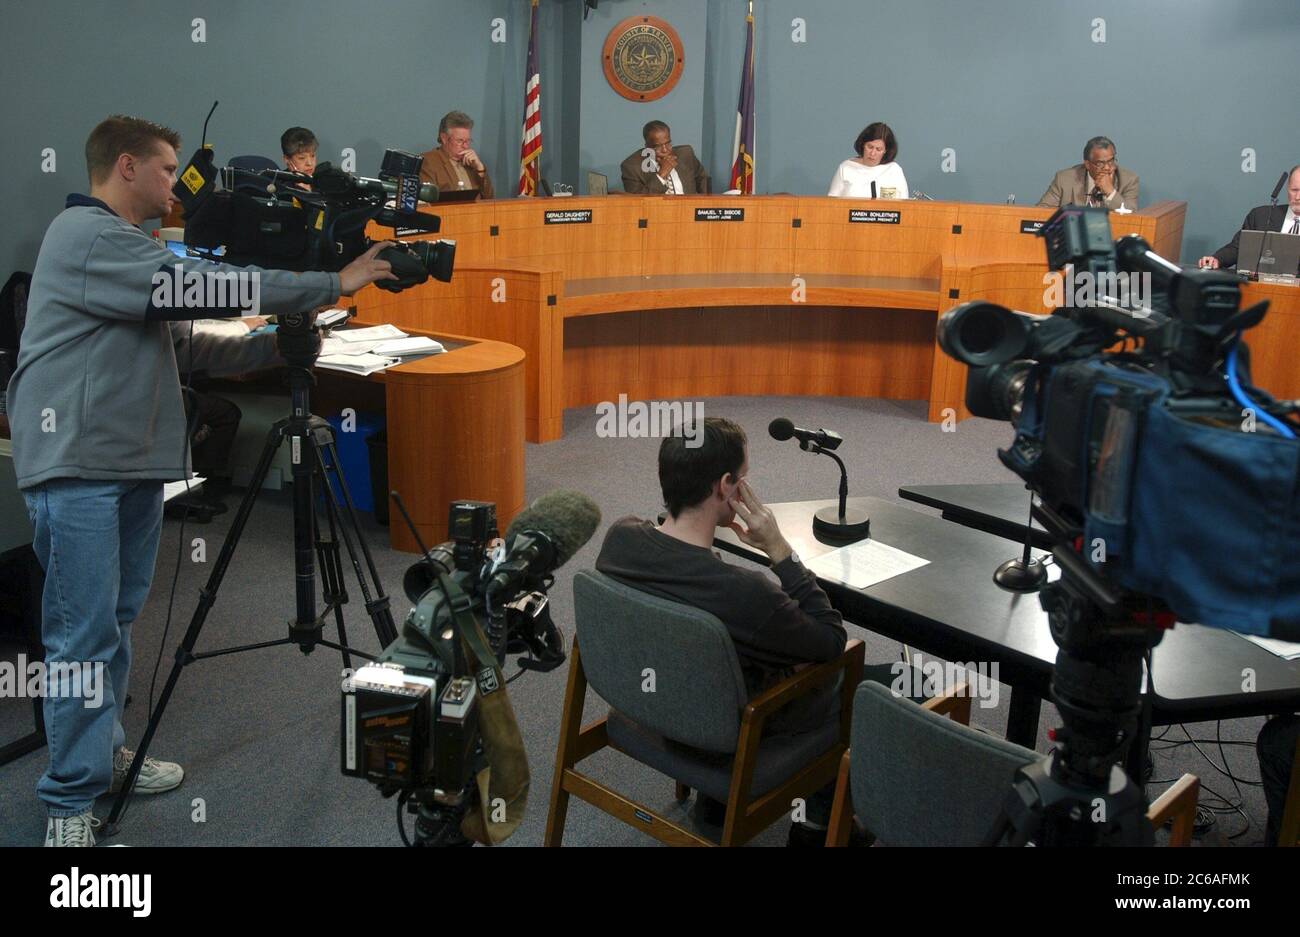 Austin, Texas USA, January 20, 2004: Camera operator focuses on speaker during televised session of the Travis County (Texas) Commissioners Court regular meeting.  ©Bob Daemmrich Stock Photo